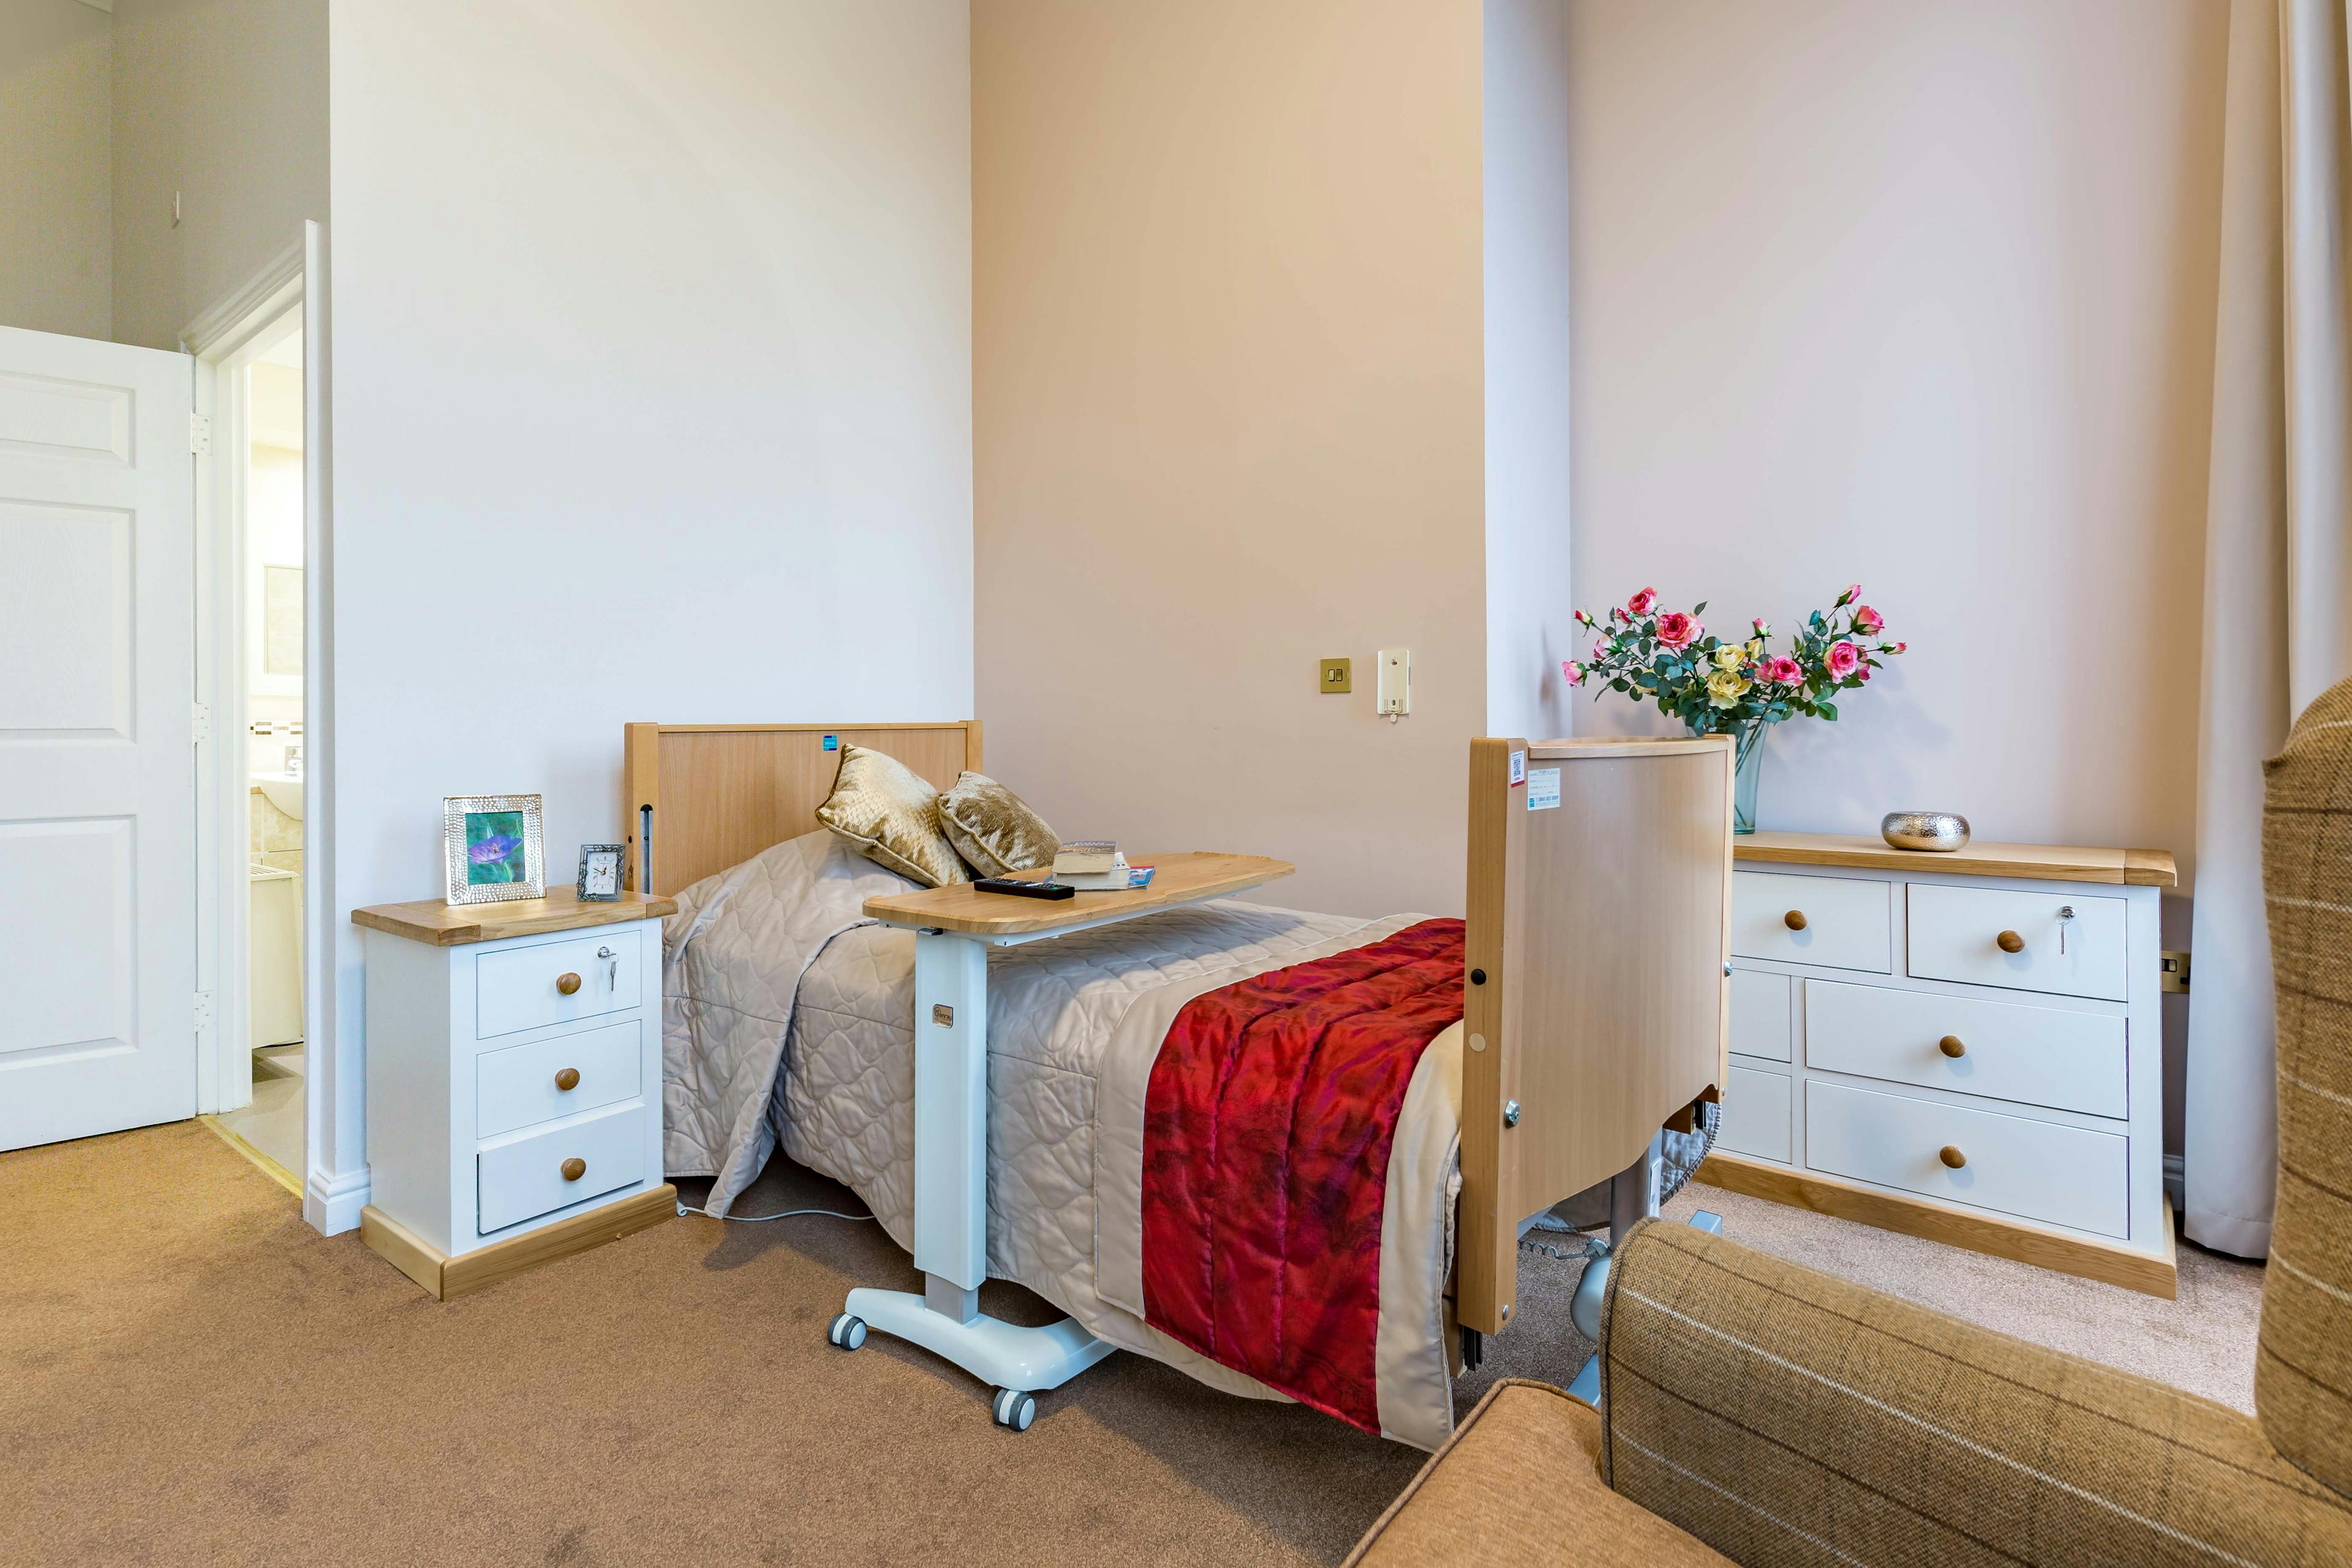 Bedroom at Southgate Beaumont Care Home in London, England